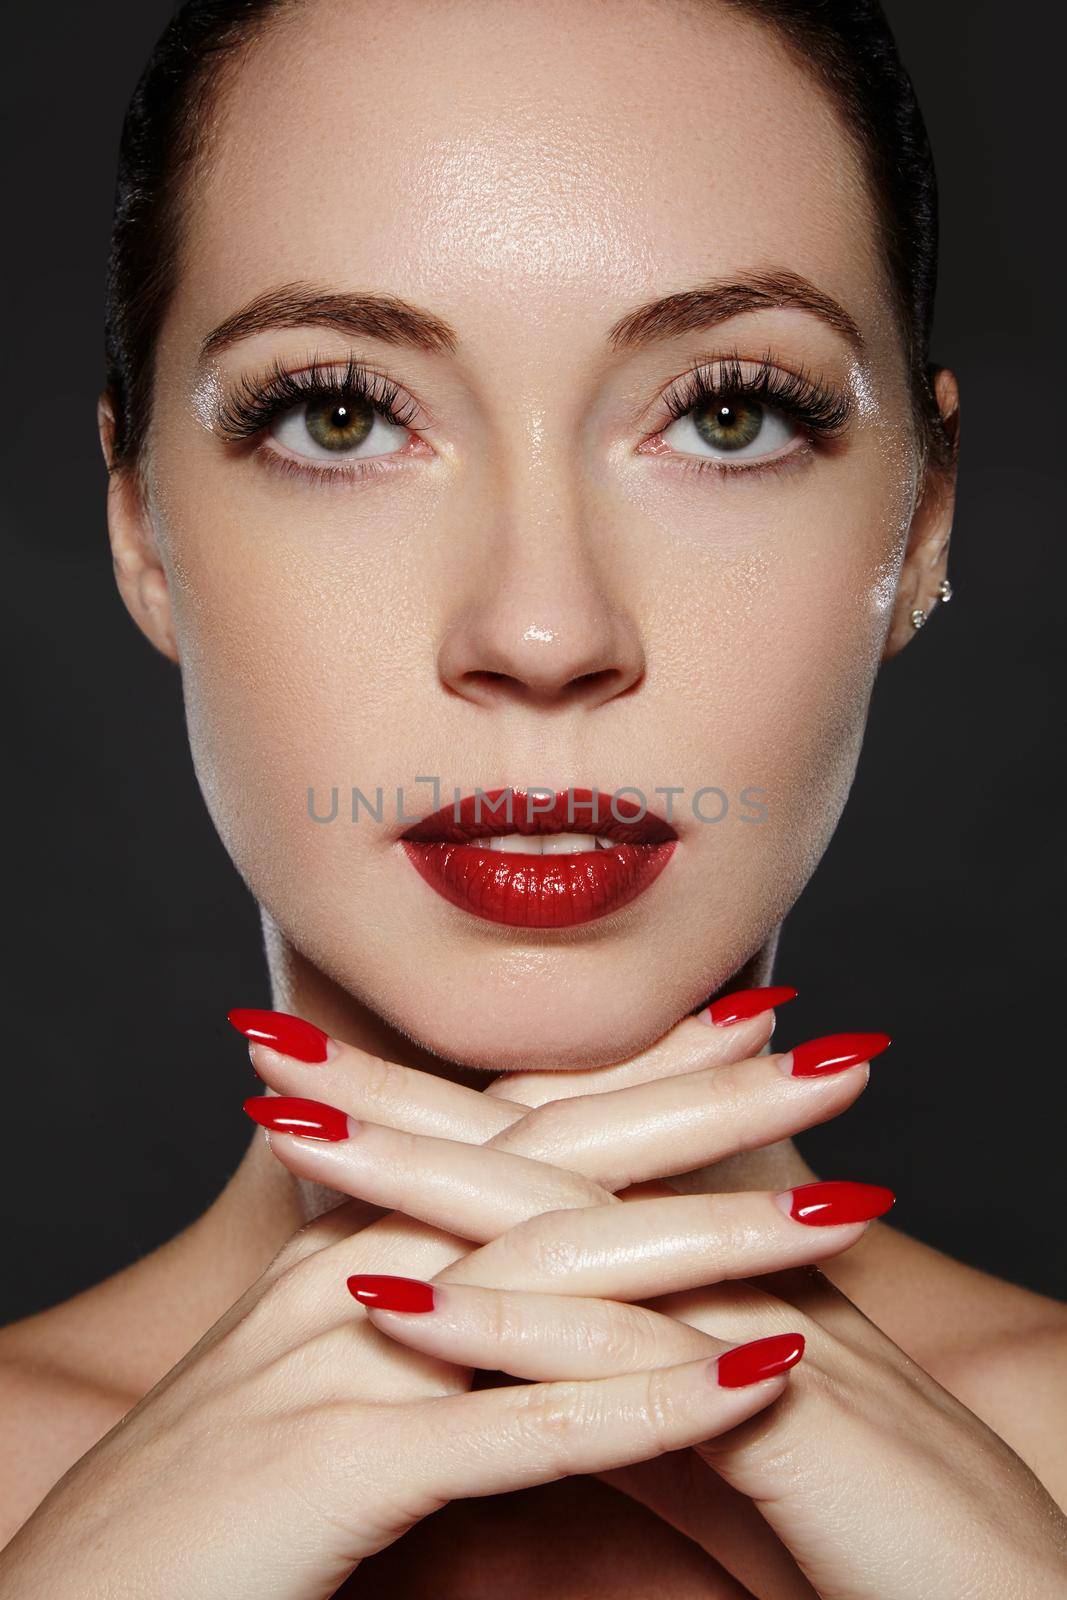 Luxury woman style vamp. Cosmetics, manicure on nails with bright red polish. Dark red lips make-up and nail color. Beauty close-up portrait of female model with red lipstick and clean skin